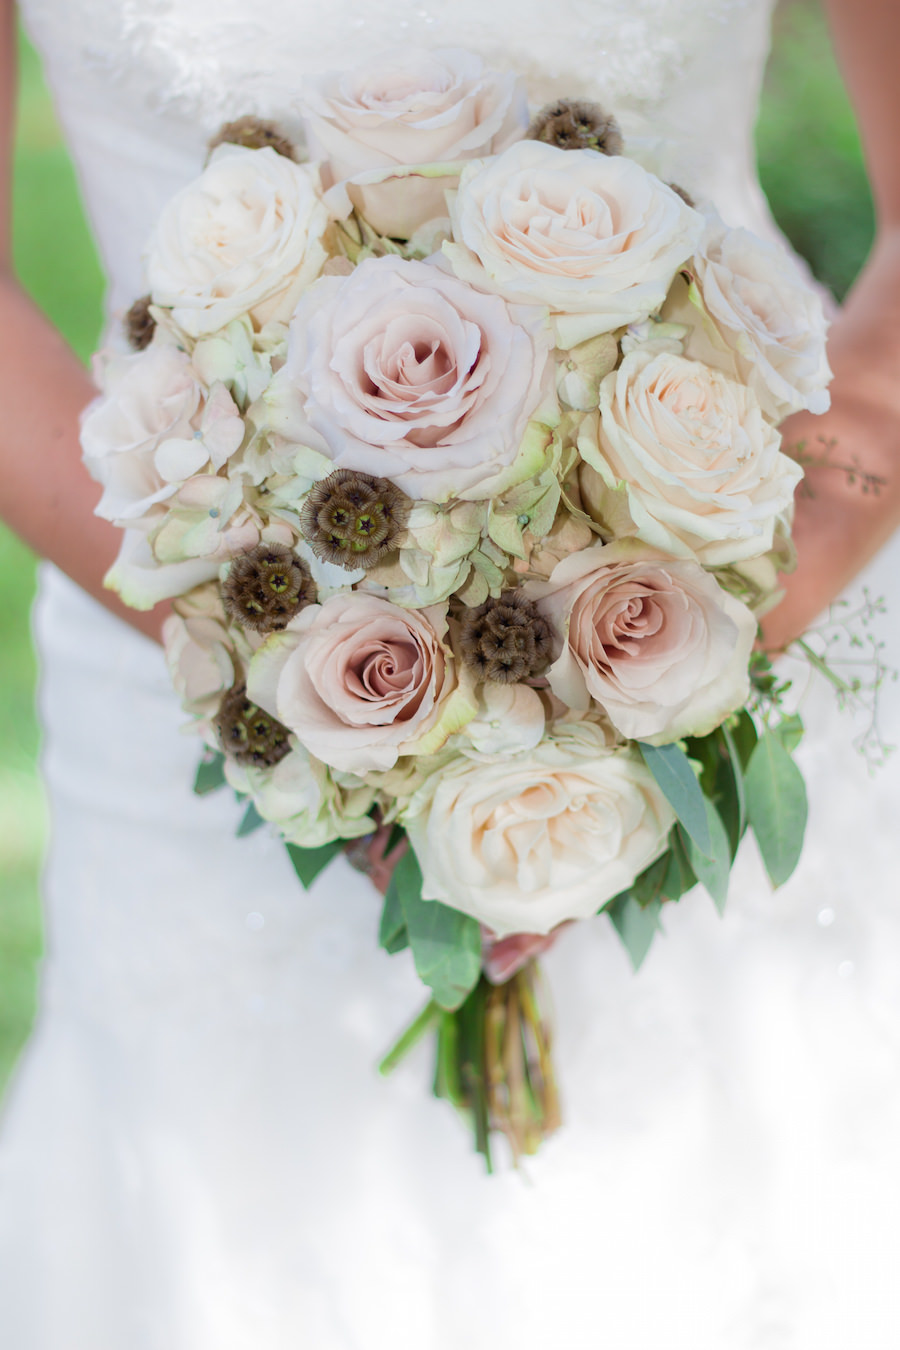 Ivory and Blush Pink Rustic Bridal Wedding Bouquet